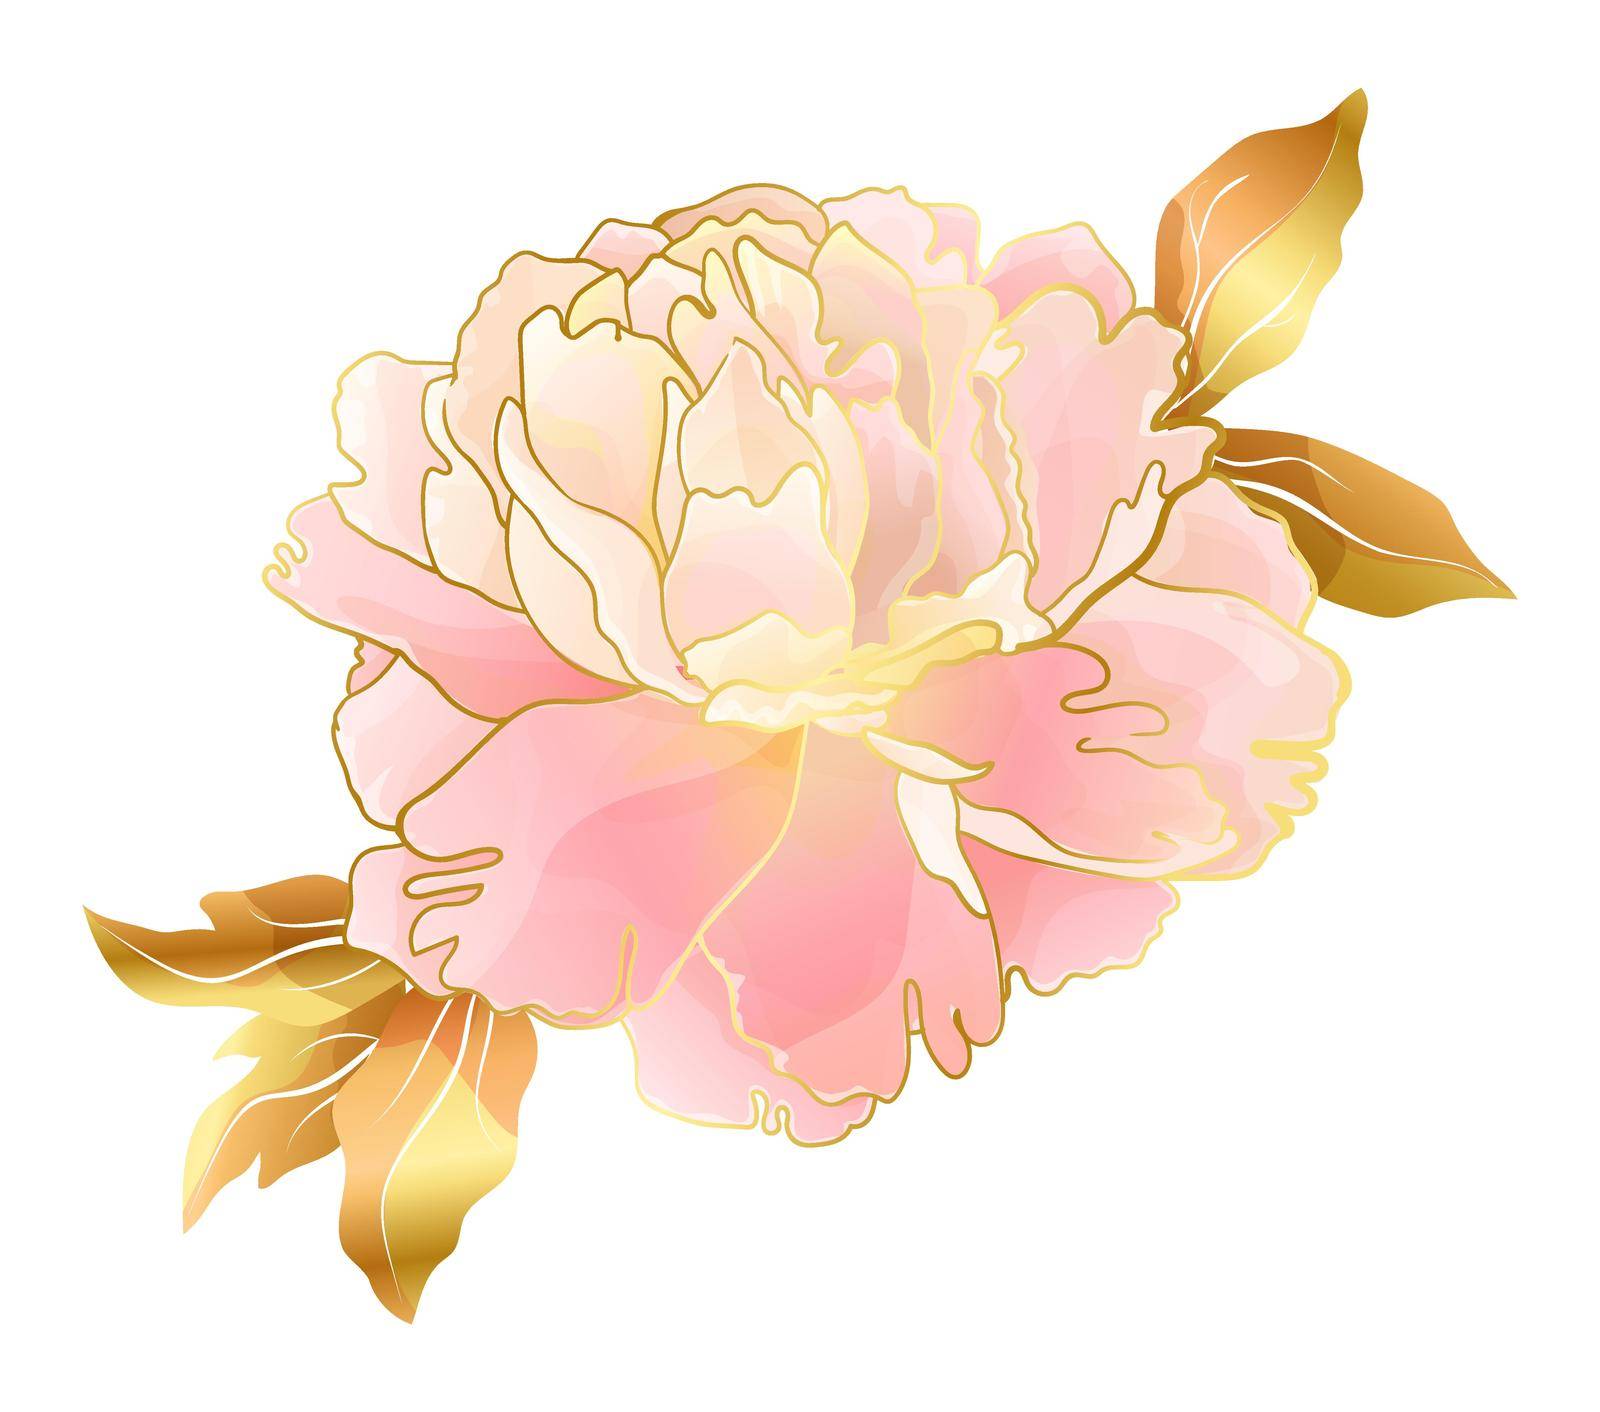 Cream pink peony flower in oriental trend by Xeniasnowstorm